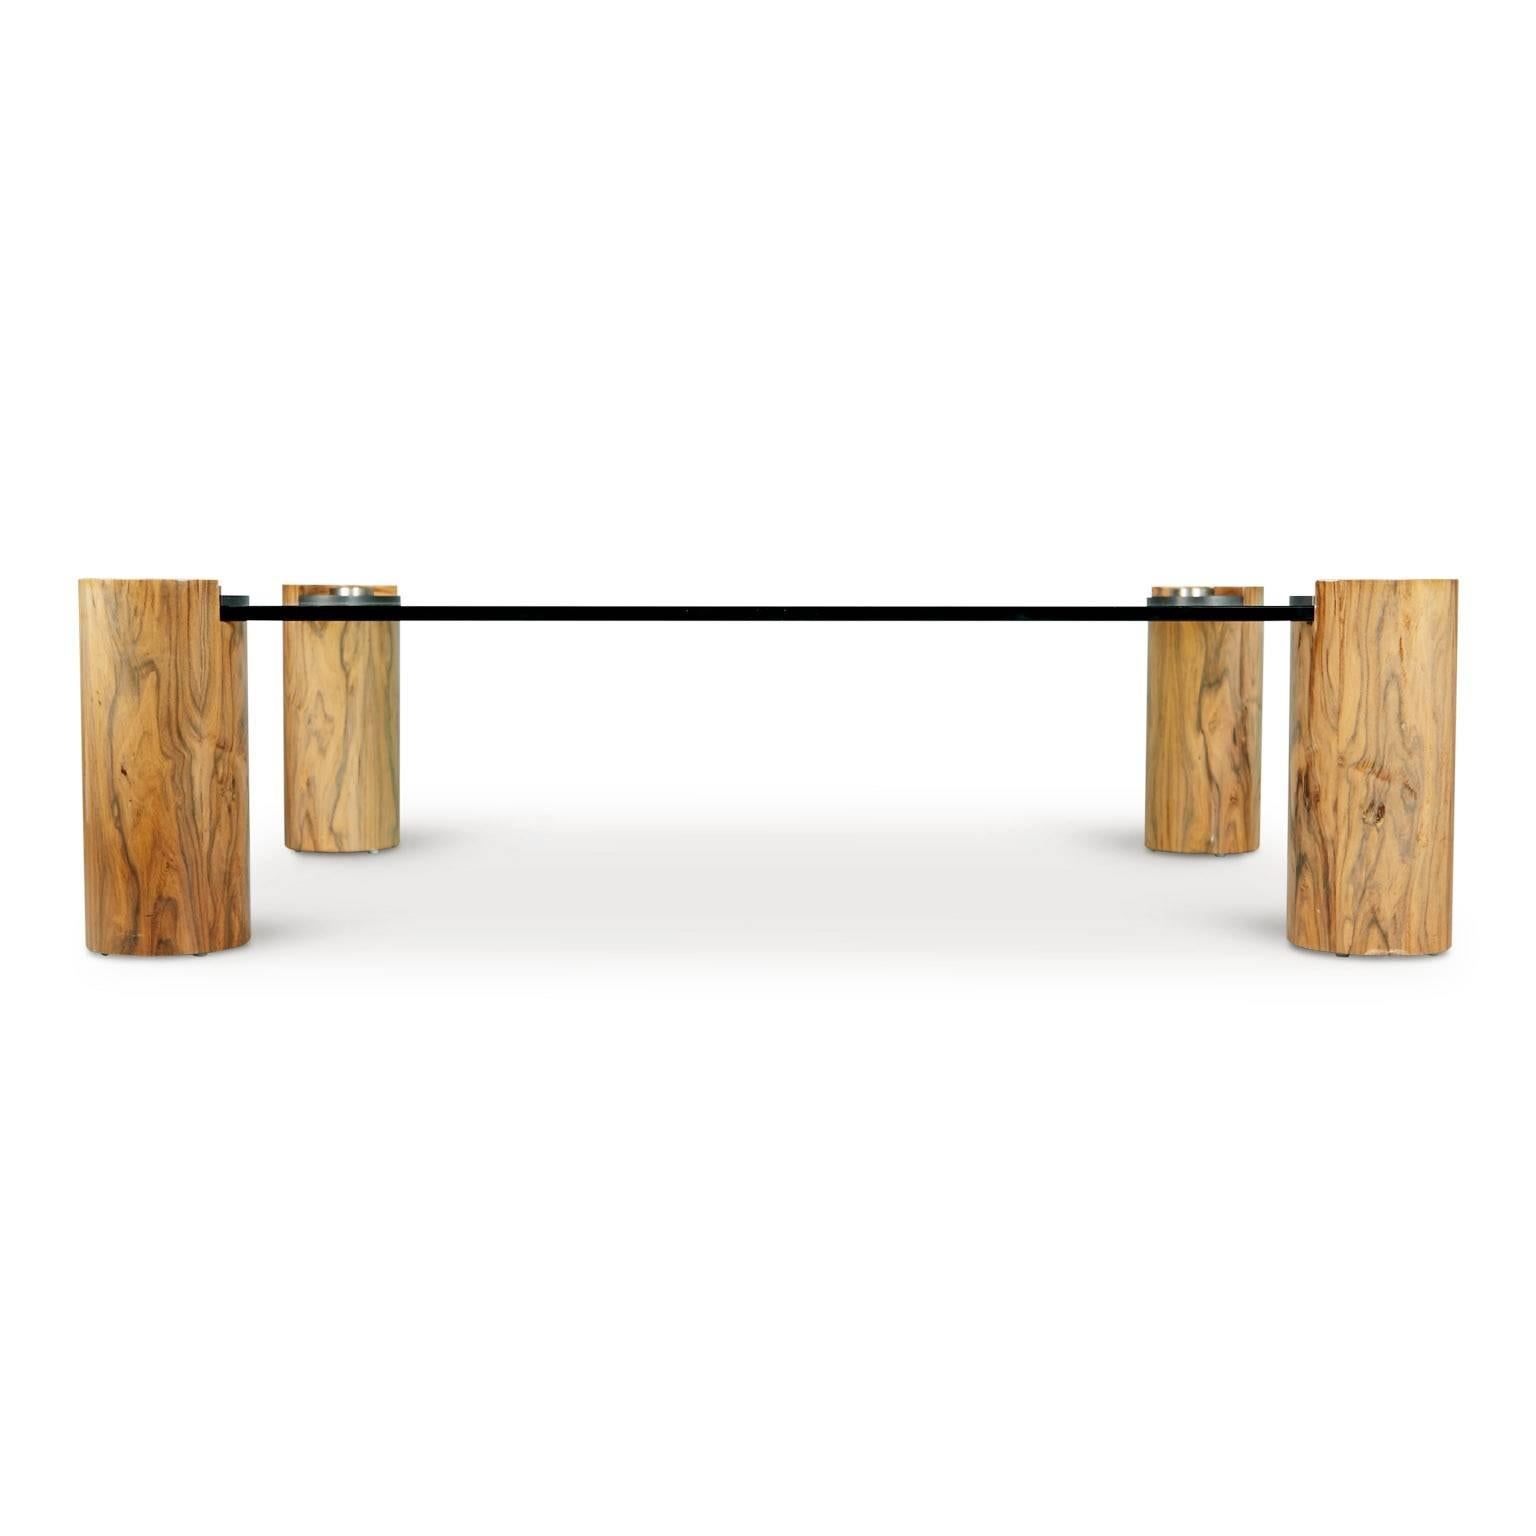 Known for his striking designs and use of exotic woods and luxurious materials, this cocktail table is an excellent example of Karl Springer's work. This expansively proportioned cocktail table displays Springer's keen sensibility for luxury and